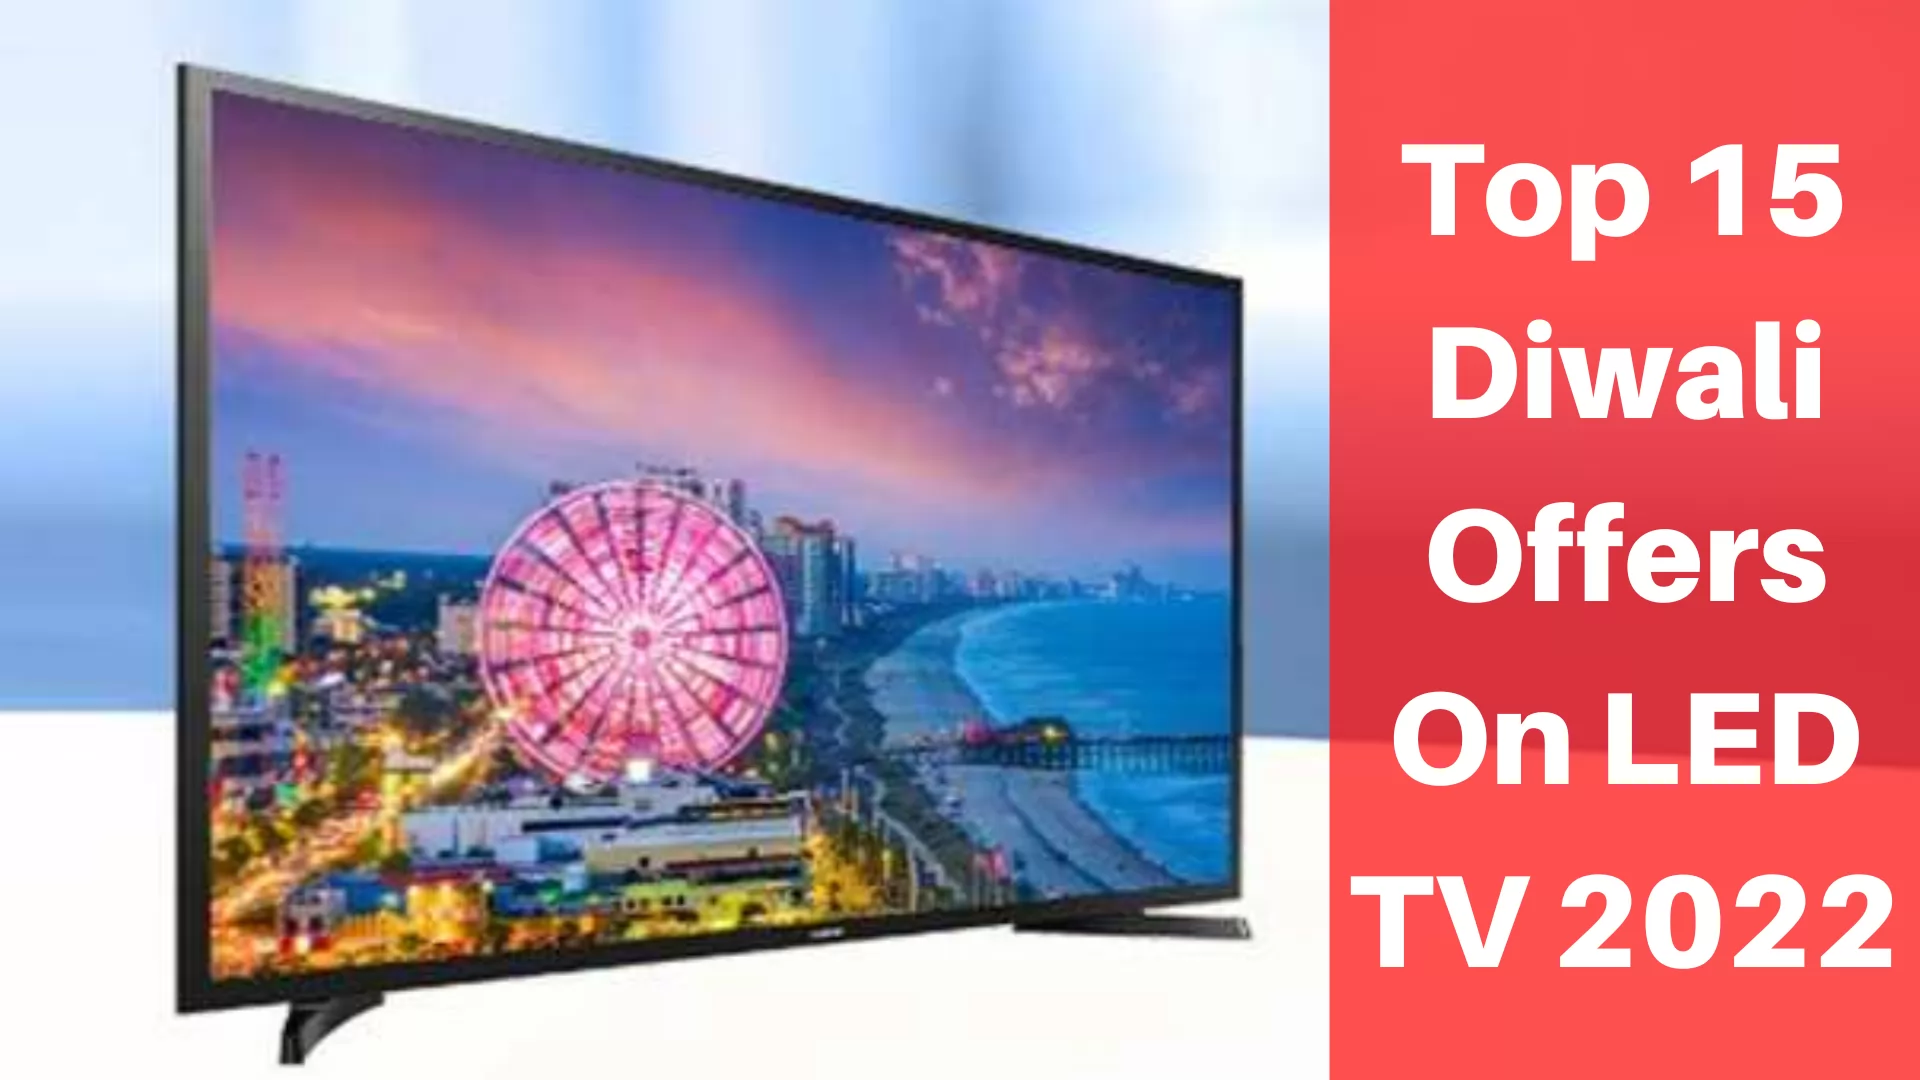 Top 15 Diwali Offers On LED TV 2022